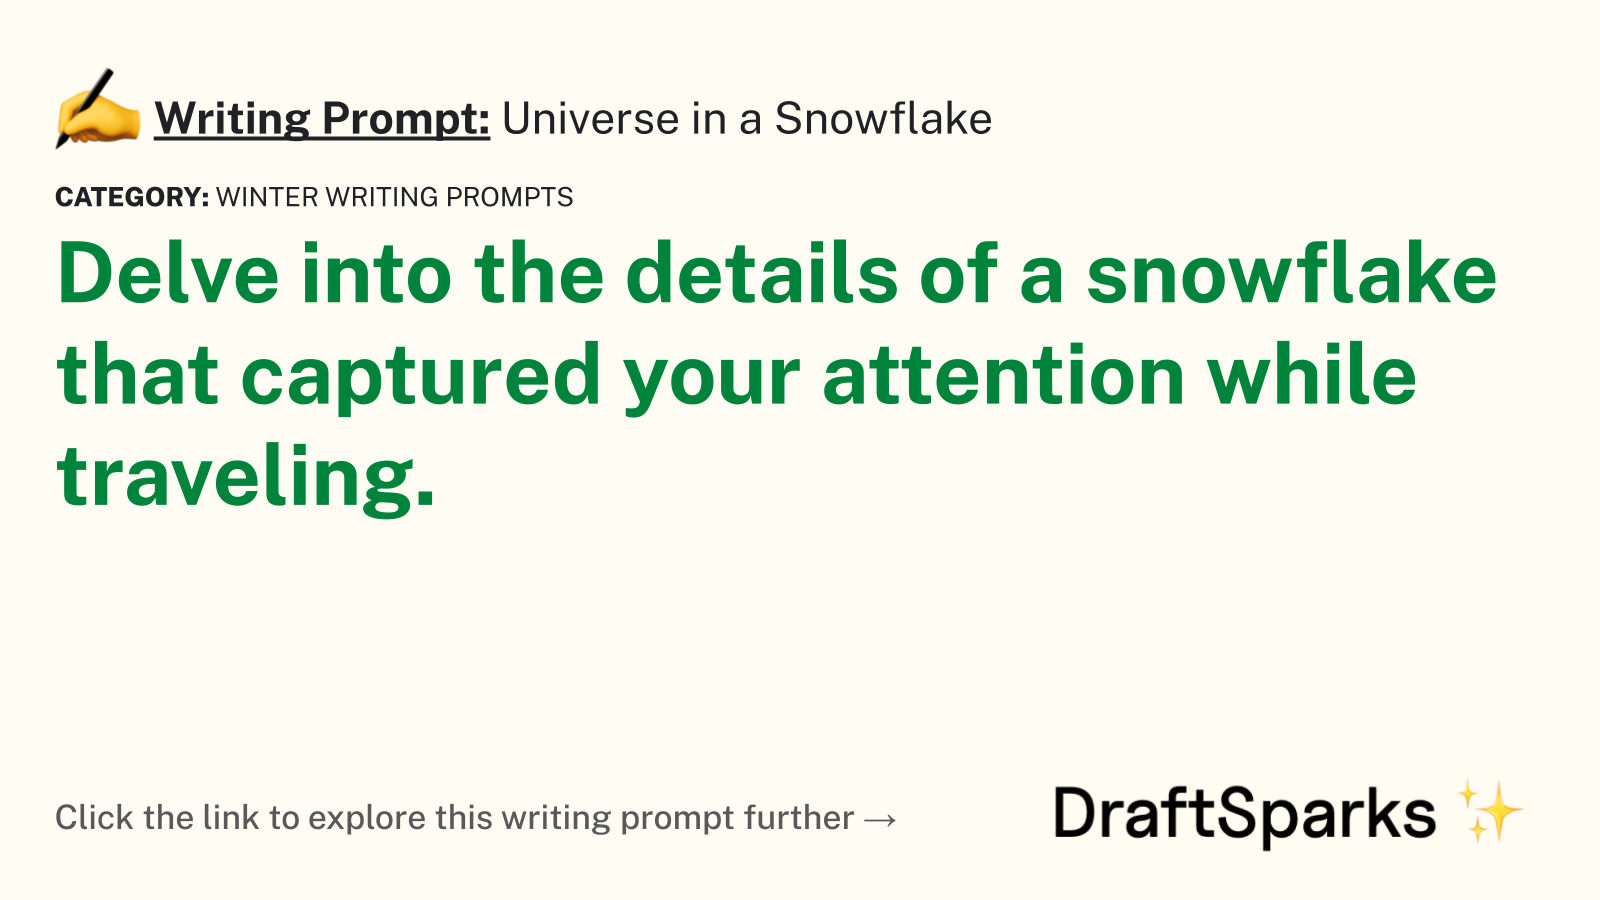 Universe in a Snowflake